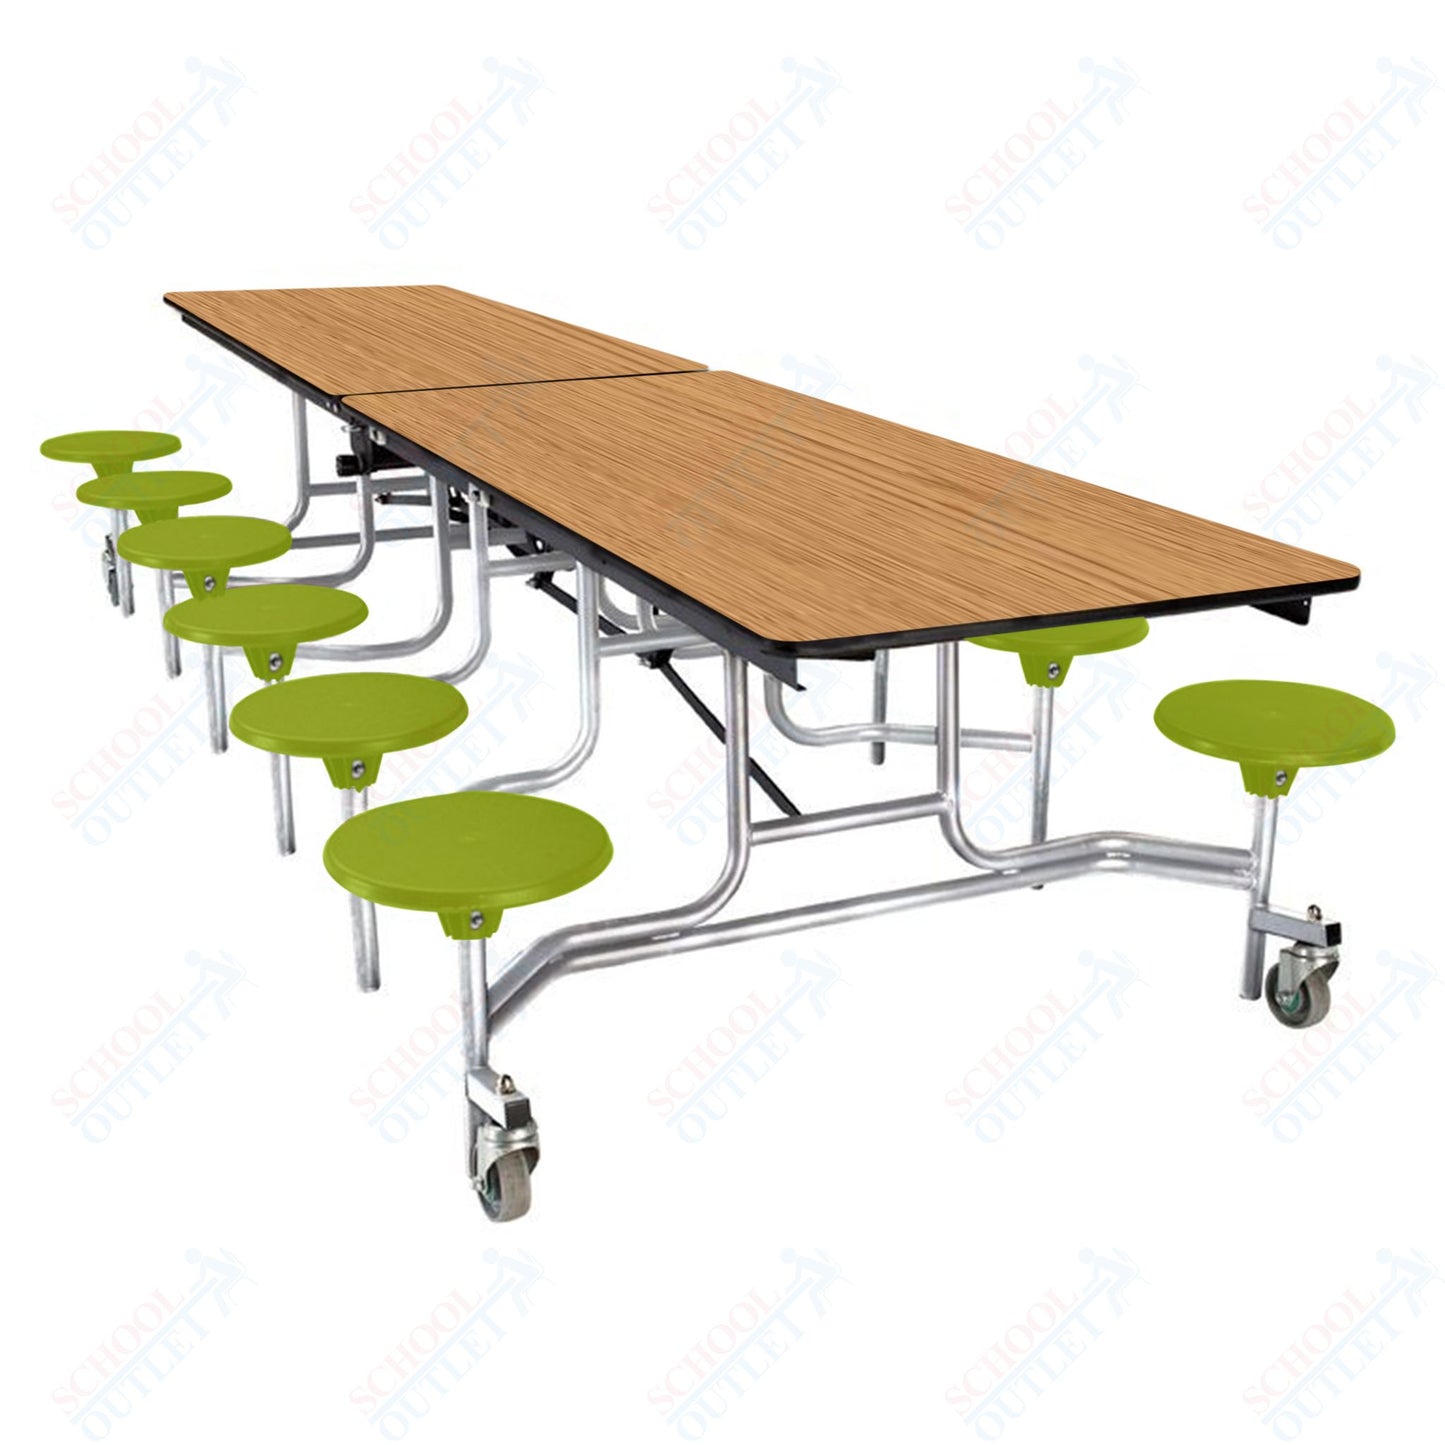 NPS Mobile Cafeteria Table - 30" W x 10' L - 12 Stools  - Particleboard Core - T-Molding Edge - Chrome Frame